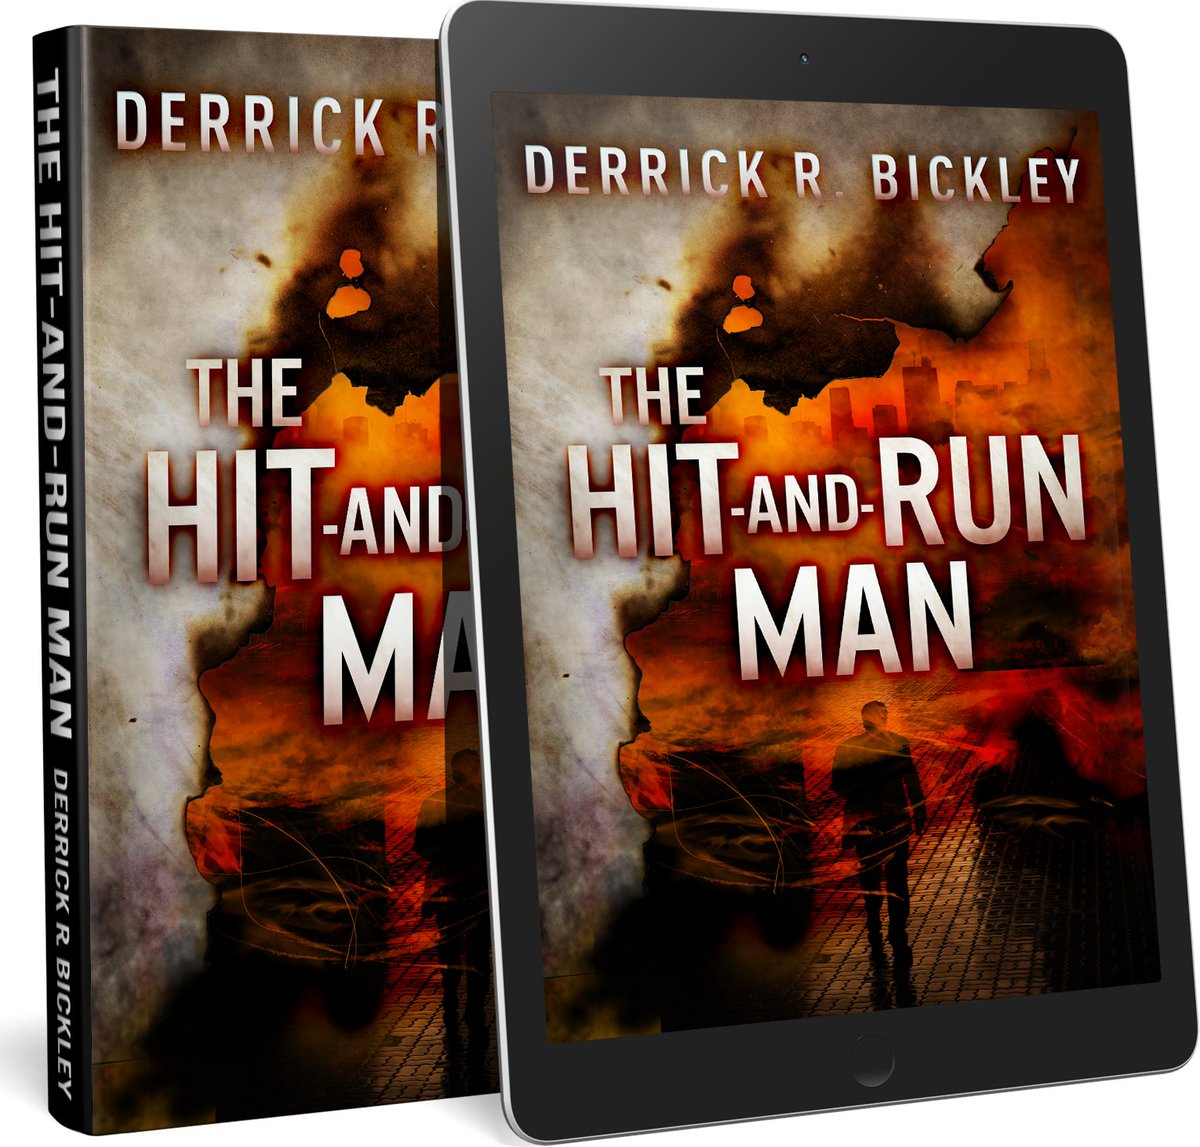 'Very clever storyline that kept me fully engrossed' mybook.to/TheHitAndRunMan THE HIT-AND-RUN MAN on #Kindle or your favourite digital store  PAPERBACK HARDBACK (Amzn inc L/Print  B&N inc L/Print  Wmart) and AUDIOBOOK #crimethrillers #NextChapterPub #mustread #crime #pageturners